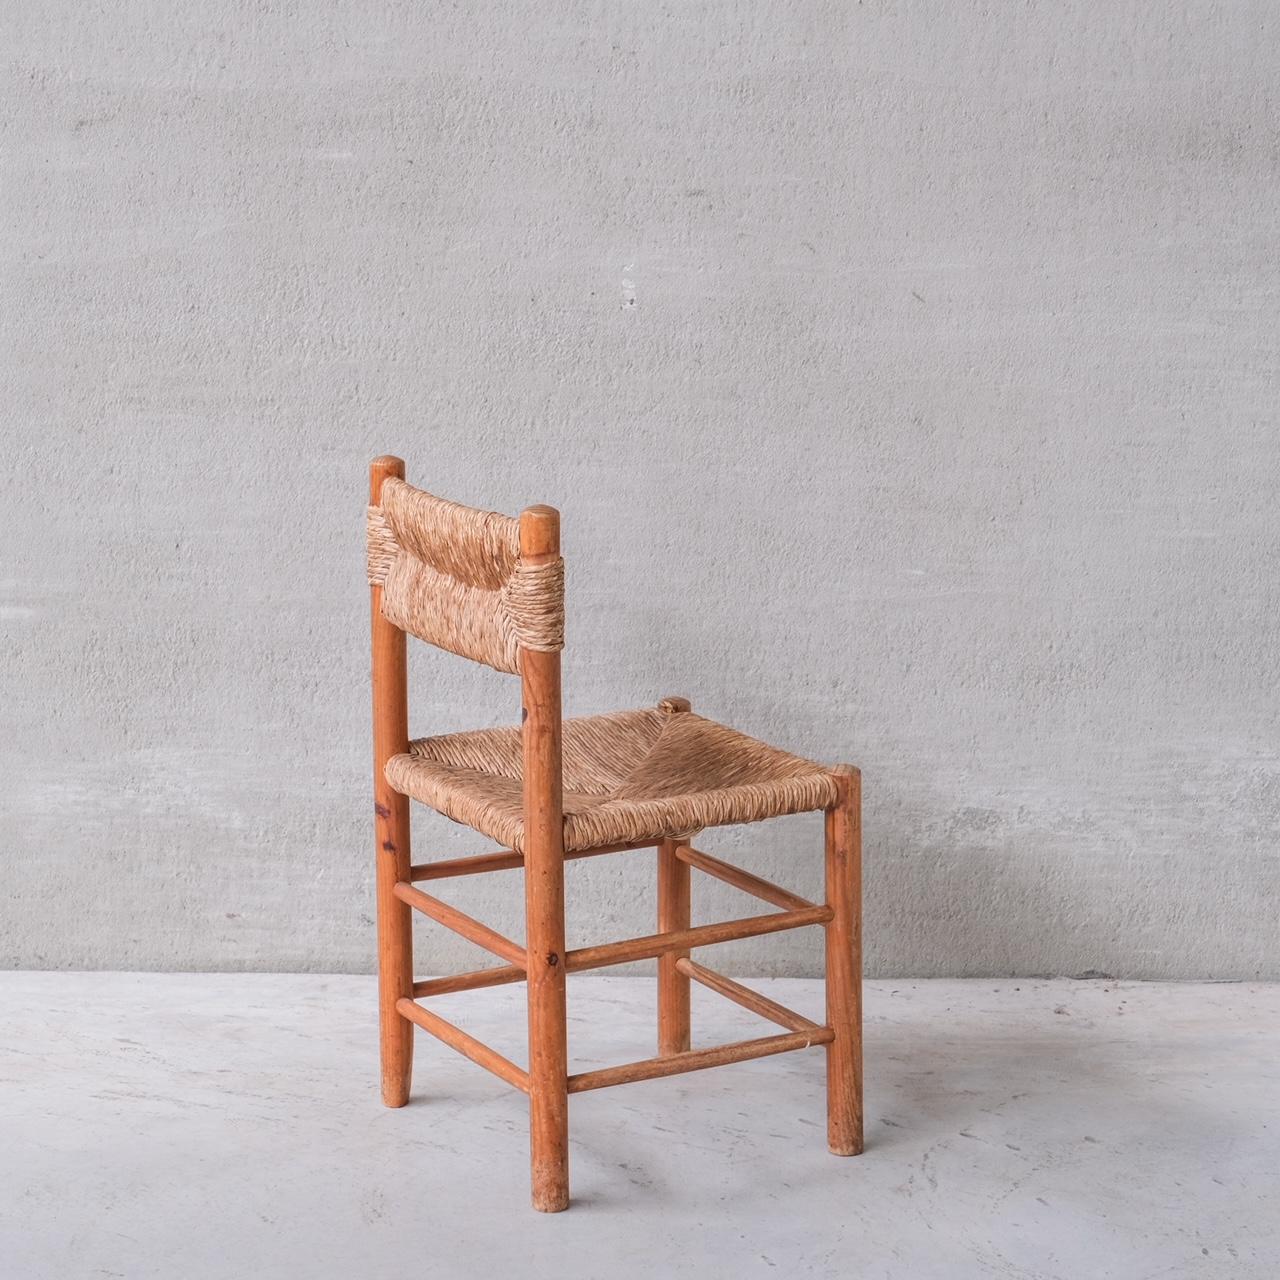 A single dining chair or occasional chair by Dutch designer Ate van Apeldoorn for Houtwerk Hattem.

Holland, c1960s.

A similar style to the Charlotte Perriand Dordogne chairs,

Ideal to sit along side a fireplace or in a hallway nook.

Good vintage